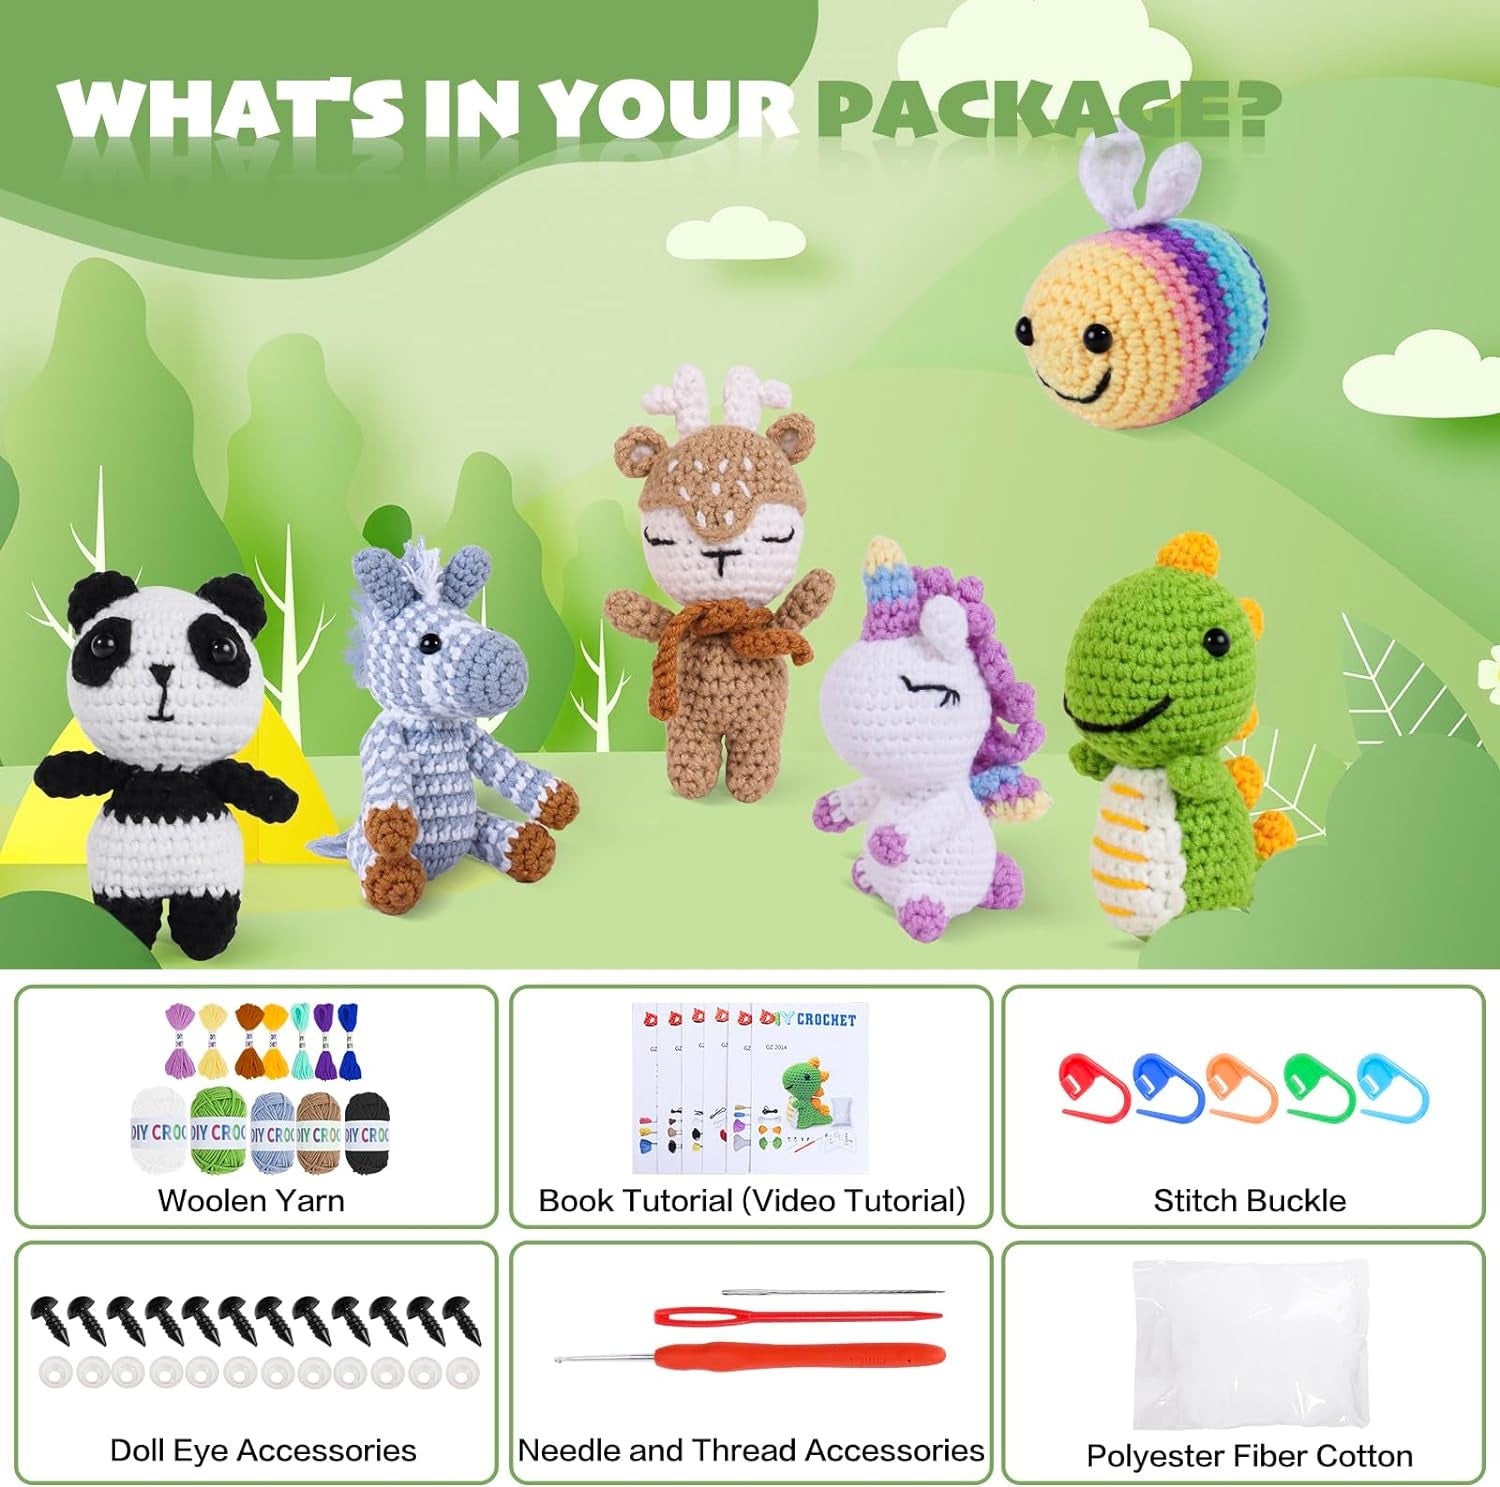 6PCS Crochet Kit for Beginners, Knitting Starter Pack for Adults and Kids，Amigurumi Crocheting Animals Kits with Step-By-Step Video Tutorials Dinosaur, Rainbow Bee,Unicorn，Elk, Panda or Zebra (A)